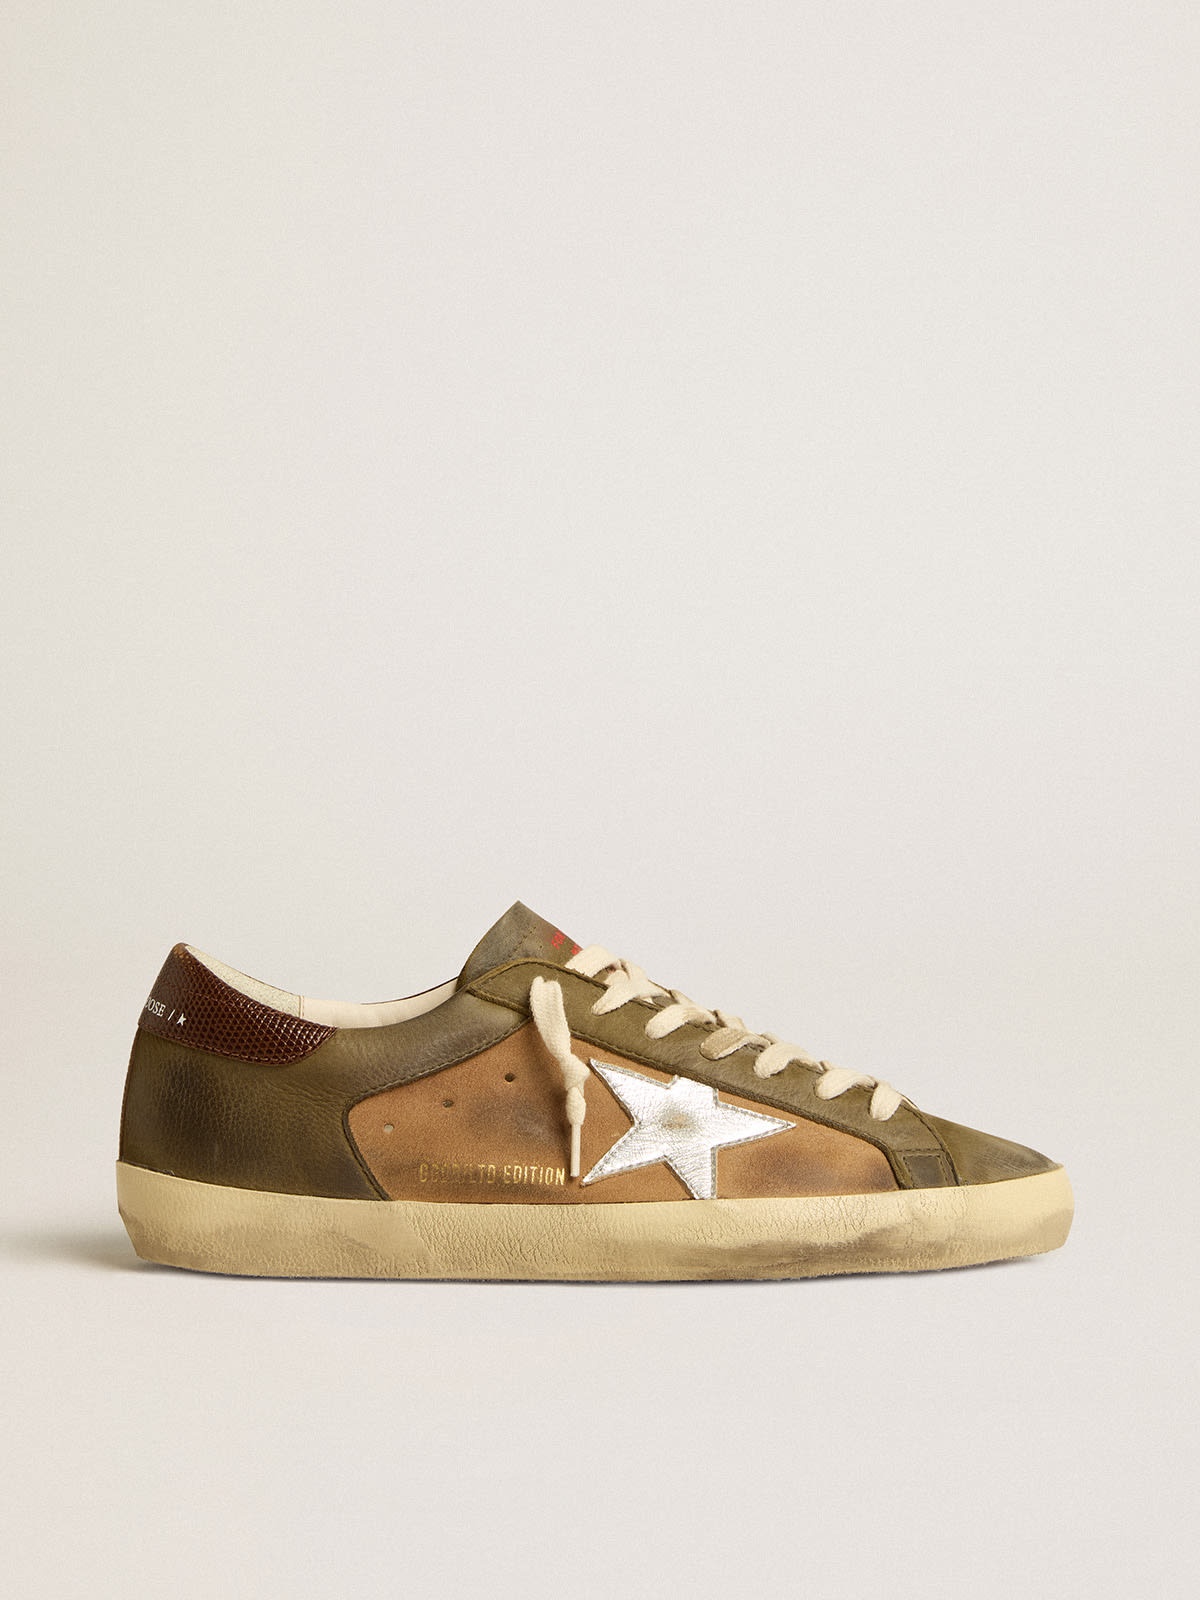 Golden Goose Super-Star LTD in green leather and tobacco-colored suede with  silver star | REVERSIBLE